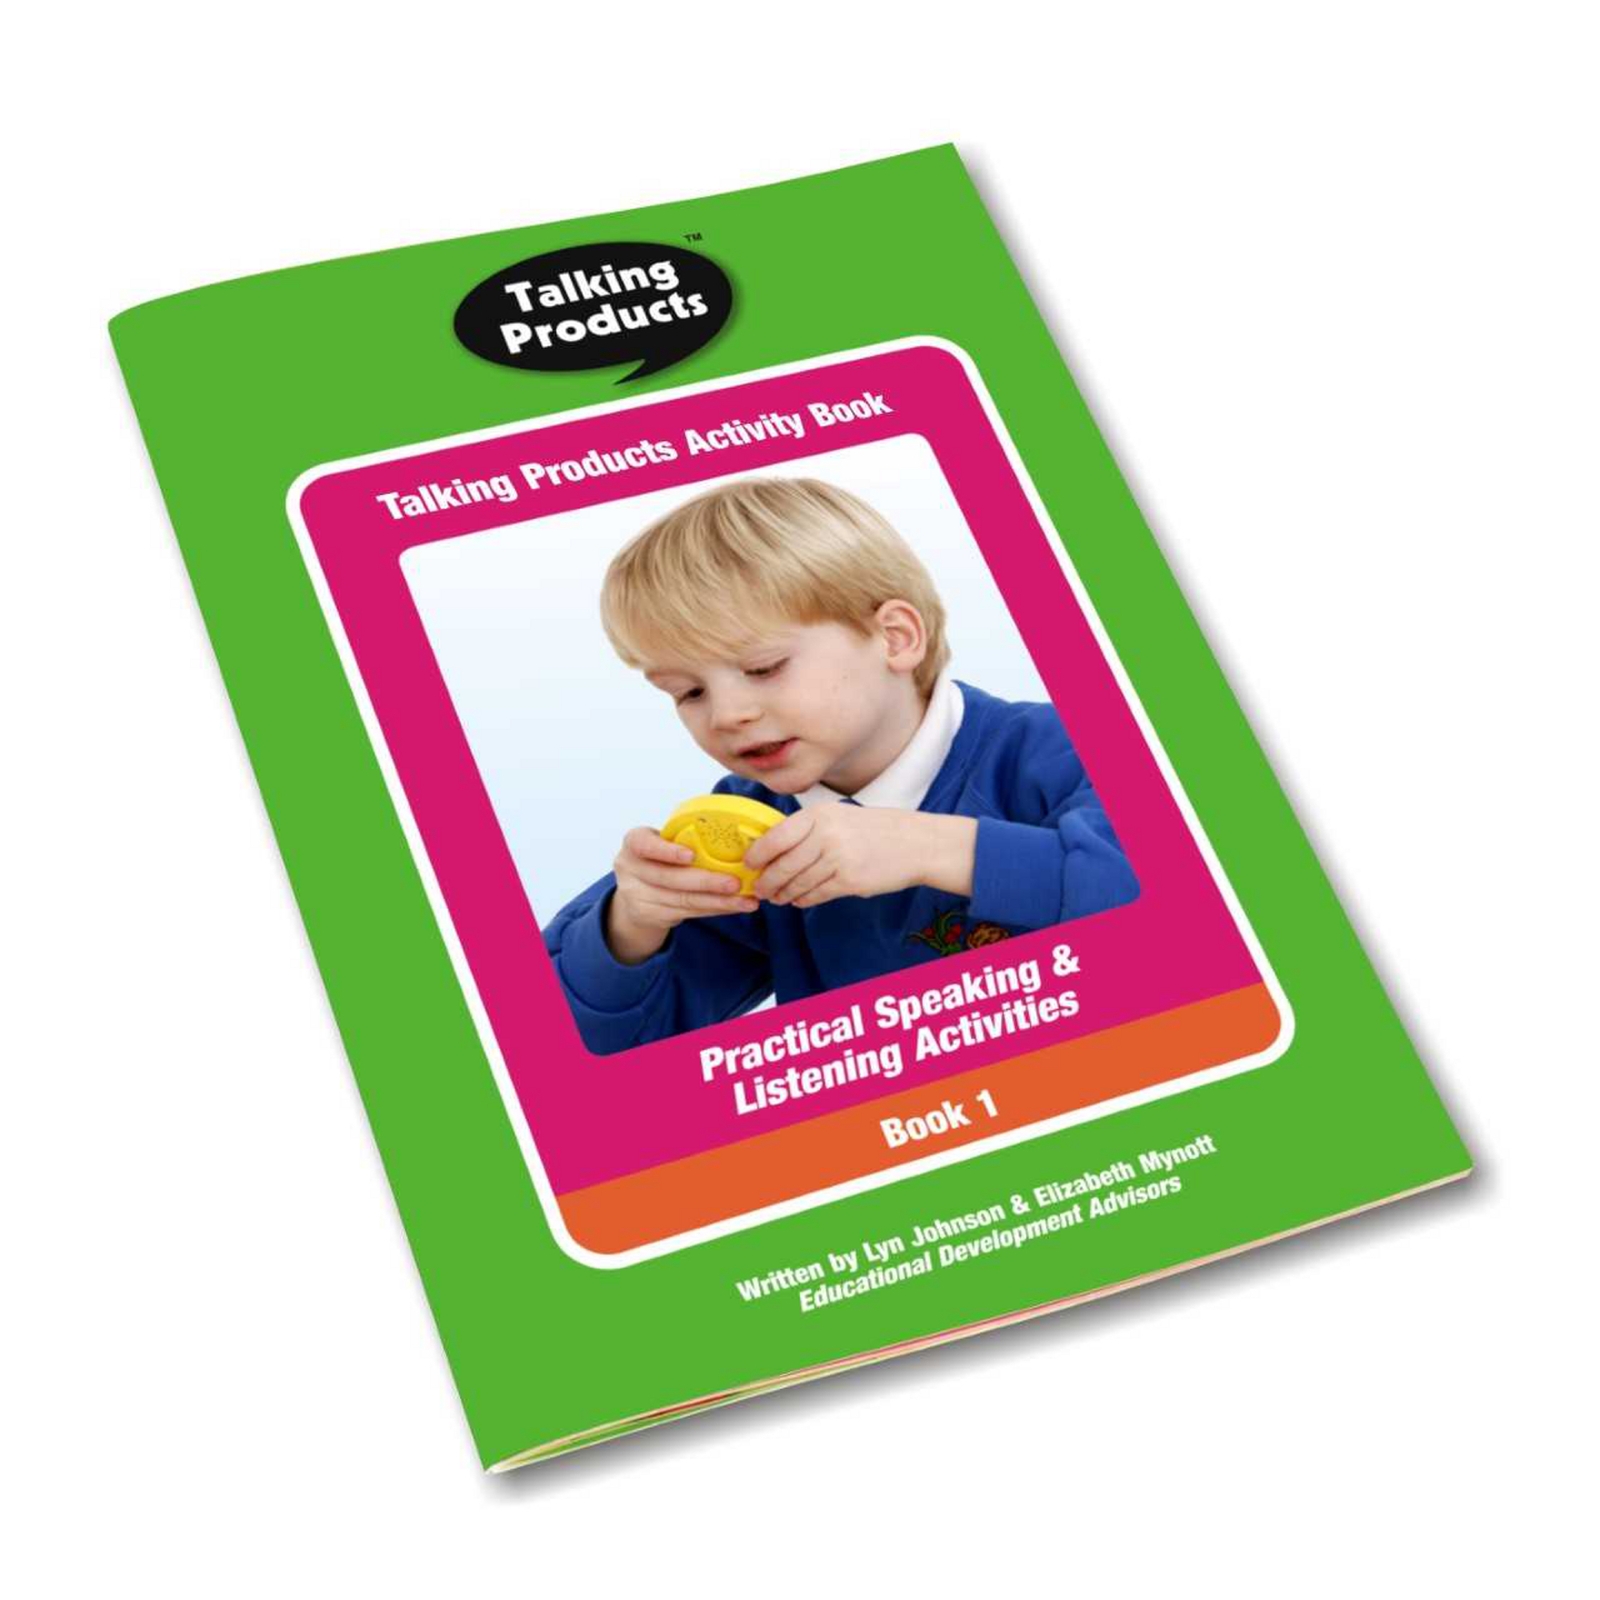 Talking Products Activity Book - Each